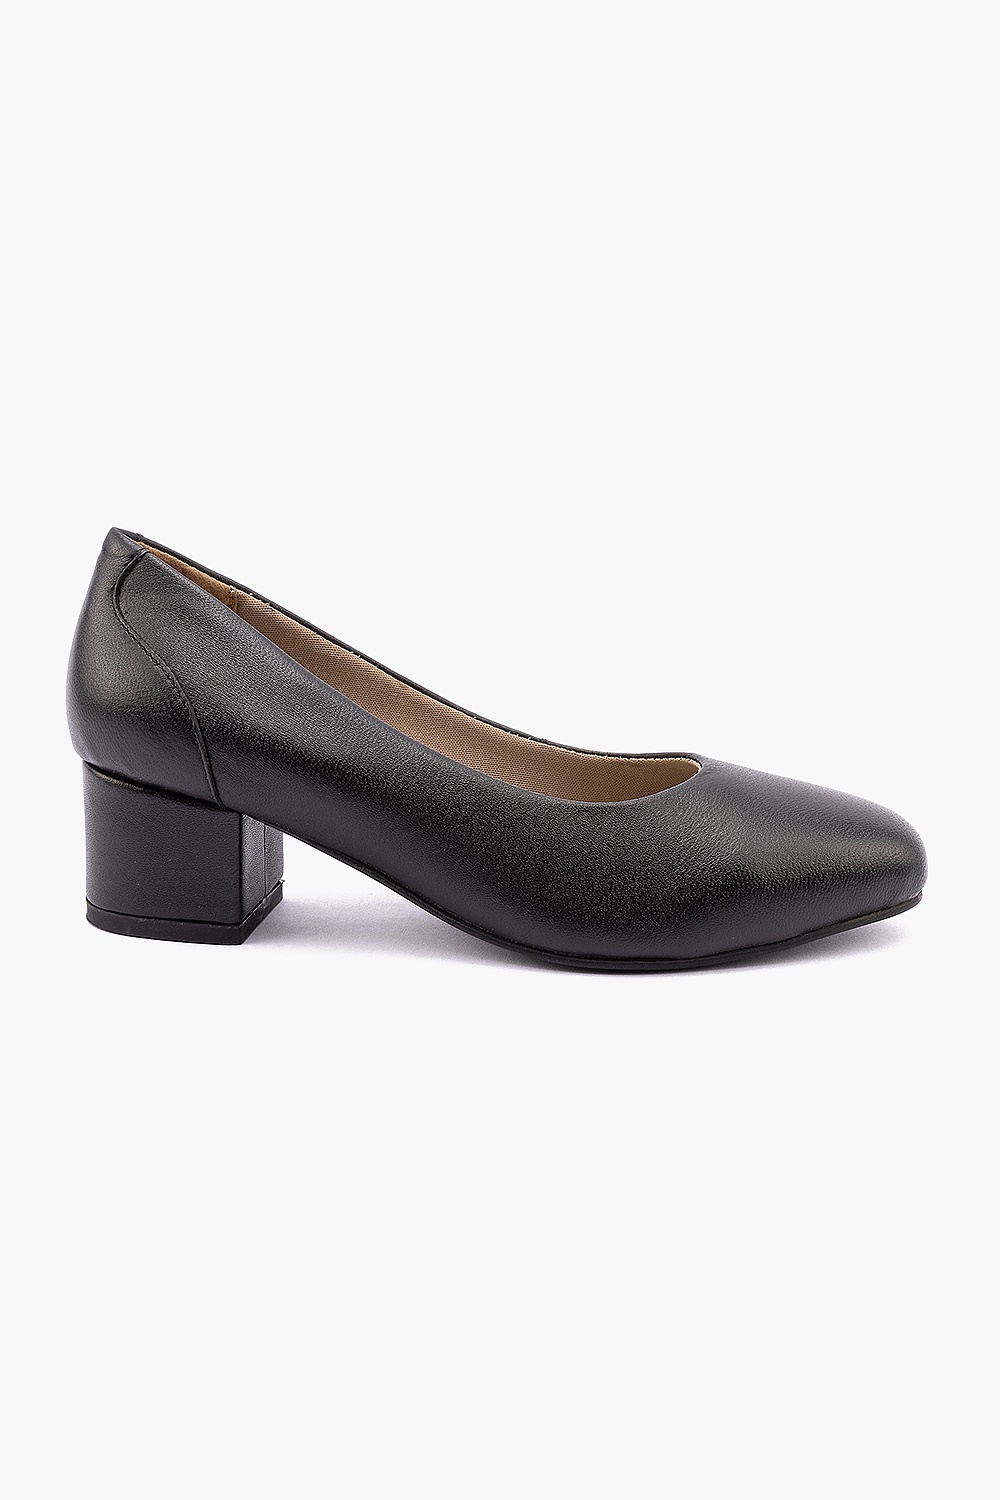 dsw shoes afterpay - OFF-60% >Free Delivery